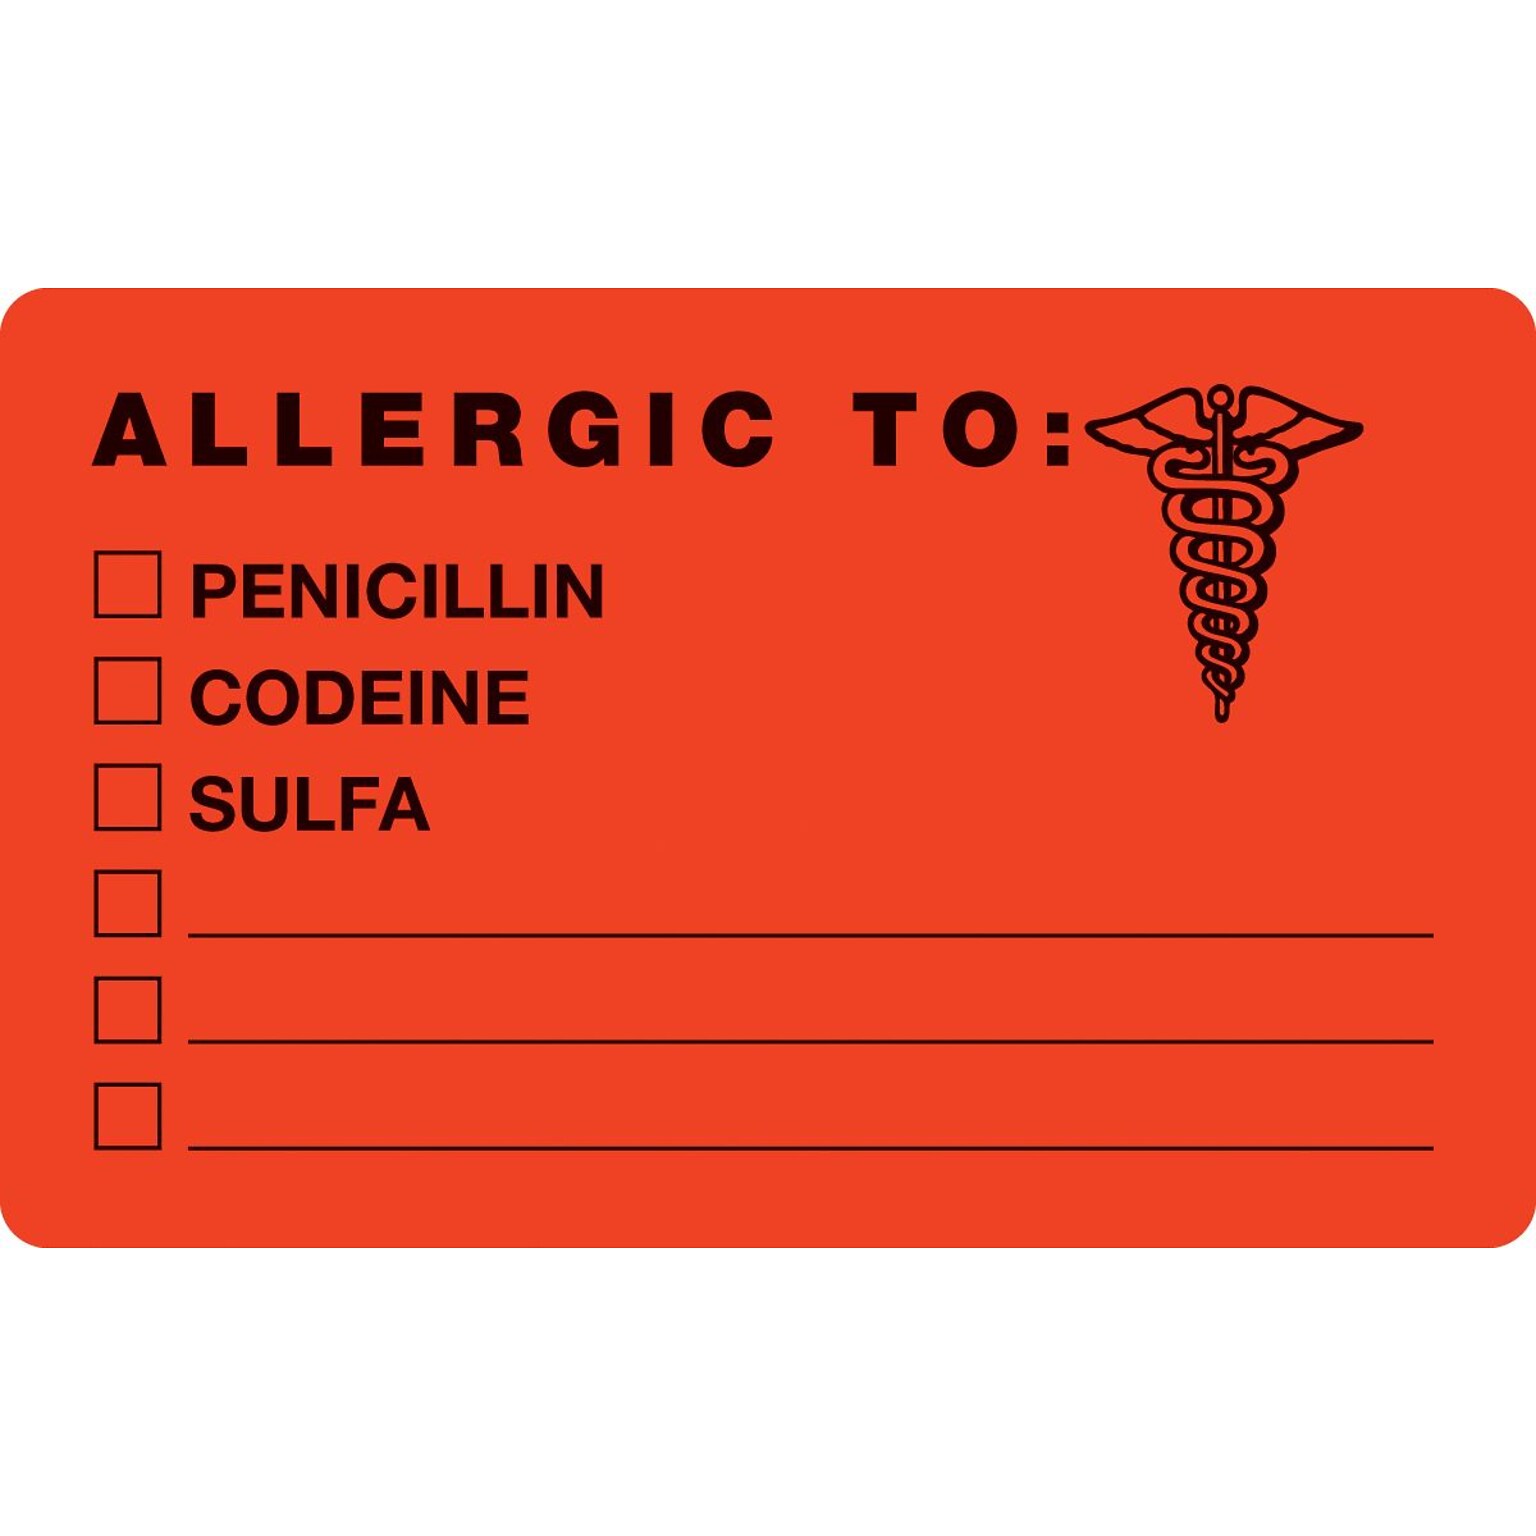 Medical Arts Press® Allergy Warning Medical Labels, Allergic To, Fluorescent Red, 2-1/2x4, 100 Labels